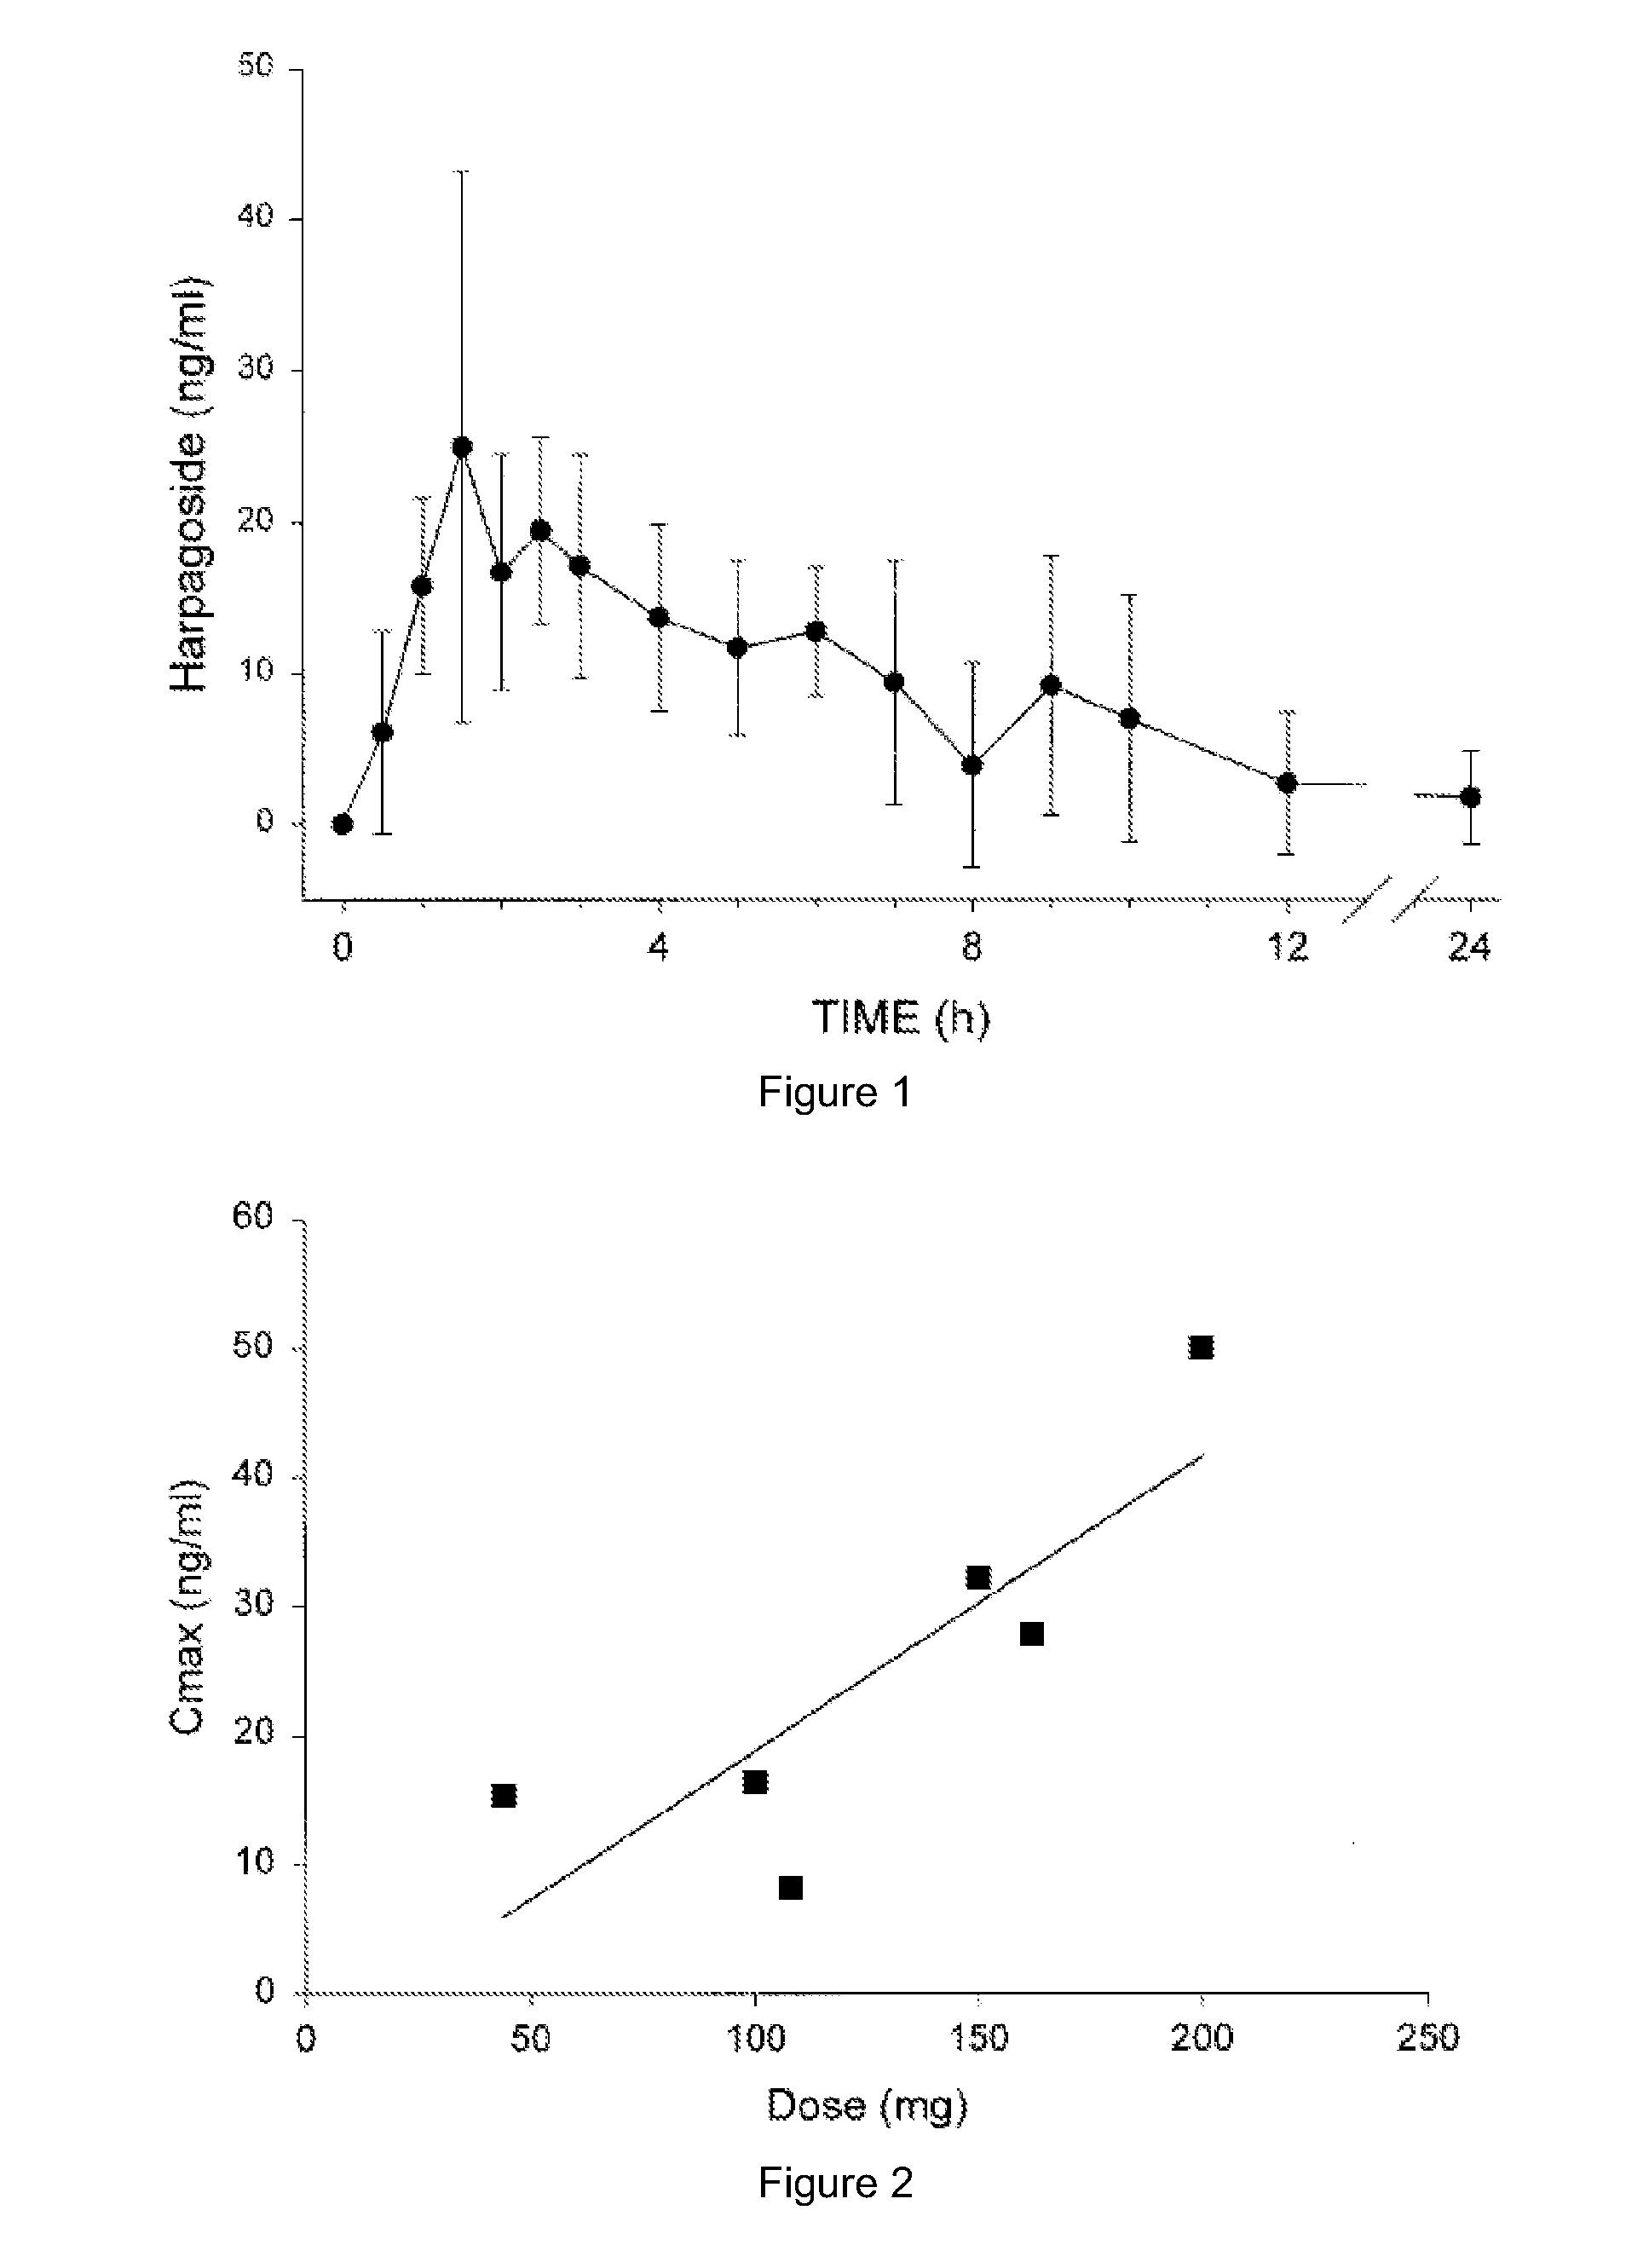 Compositions Containing Harpagoside and Paeoniflorin and Methods for Treatment of Conditions Associated with Pain, Inflammation, Arthritis and Symptoms Thereof